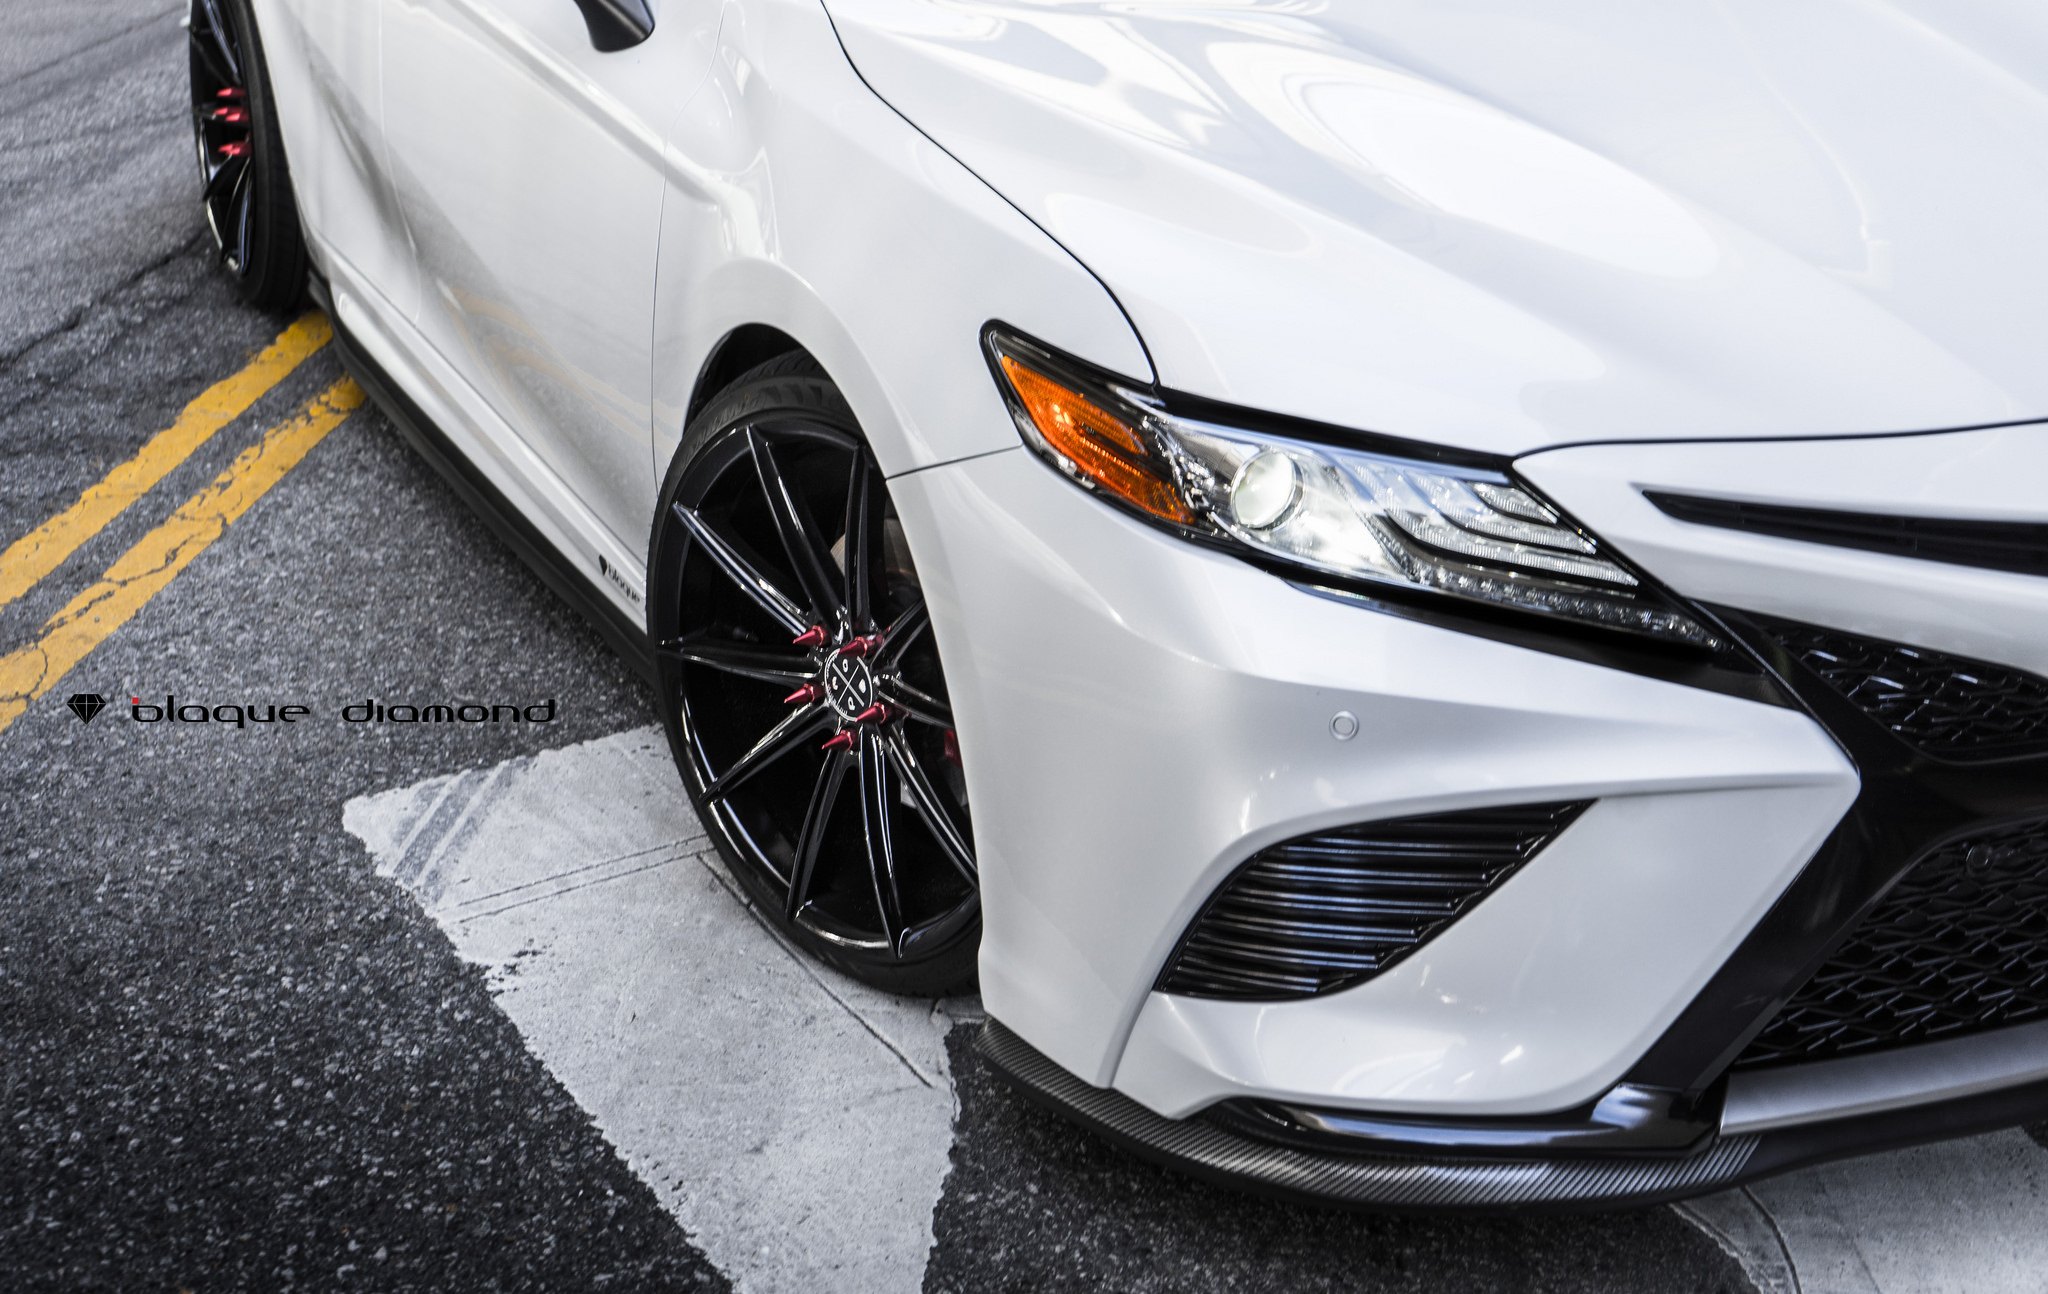 Blacked Out Mesh Grille on White Toyota Camry - Photo by Blaque Diamond Wheels